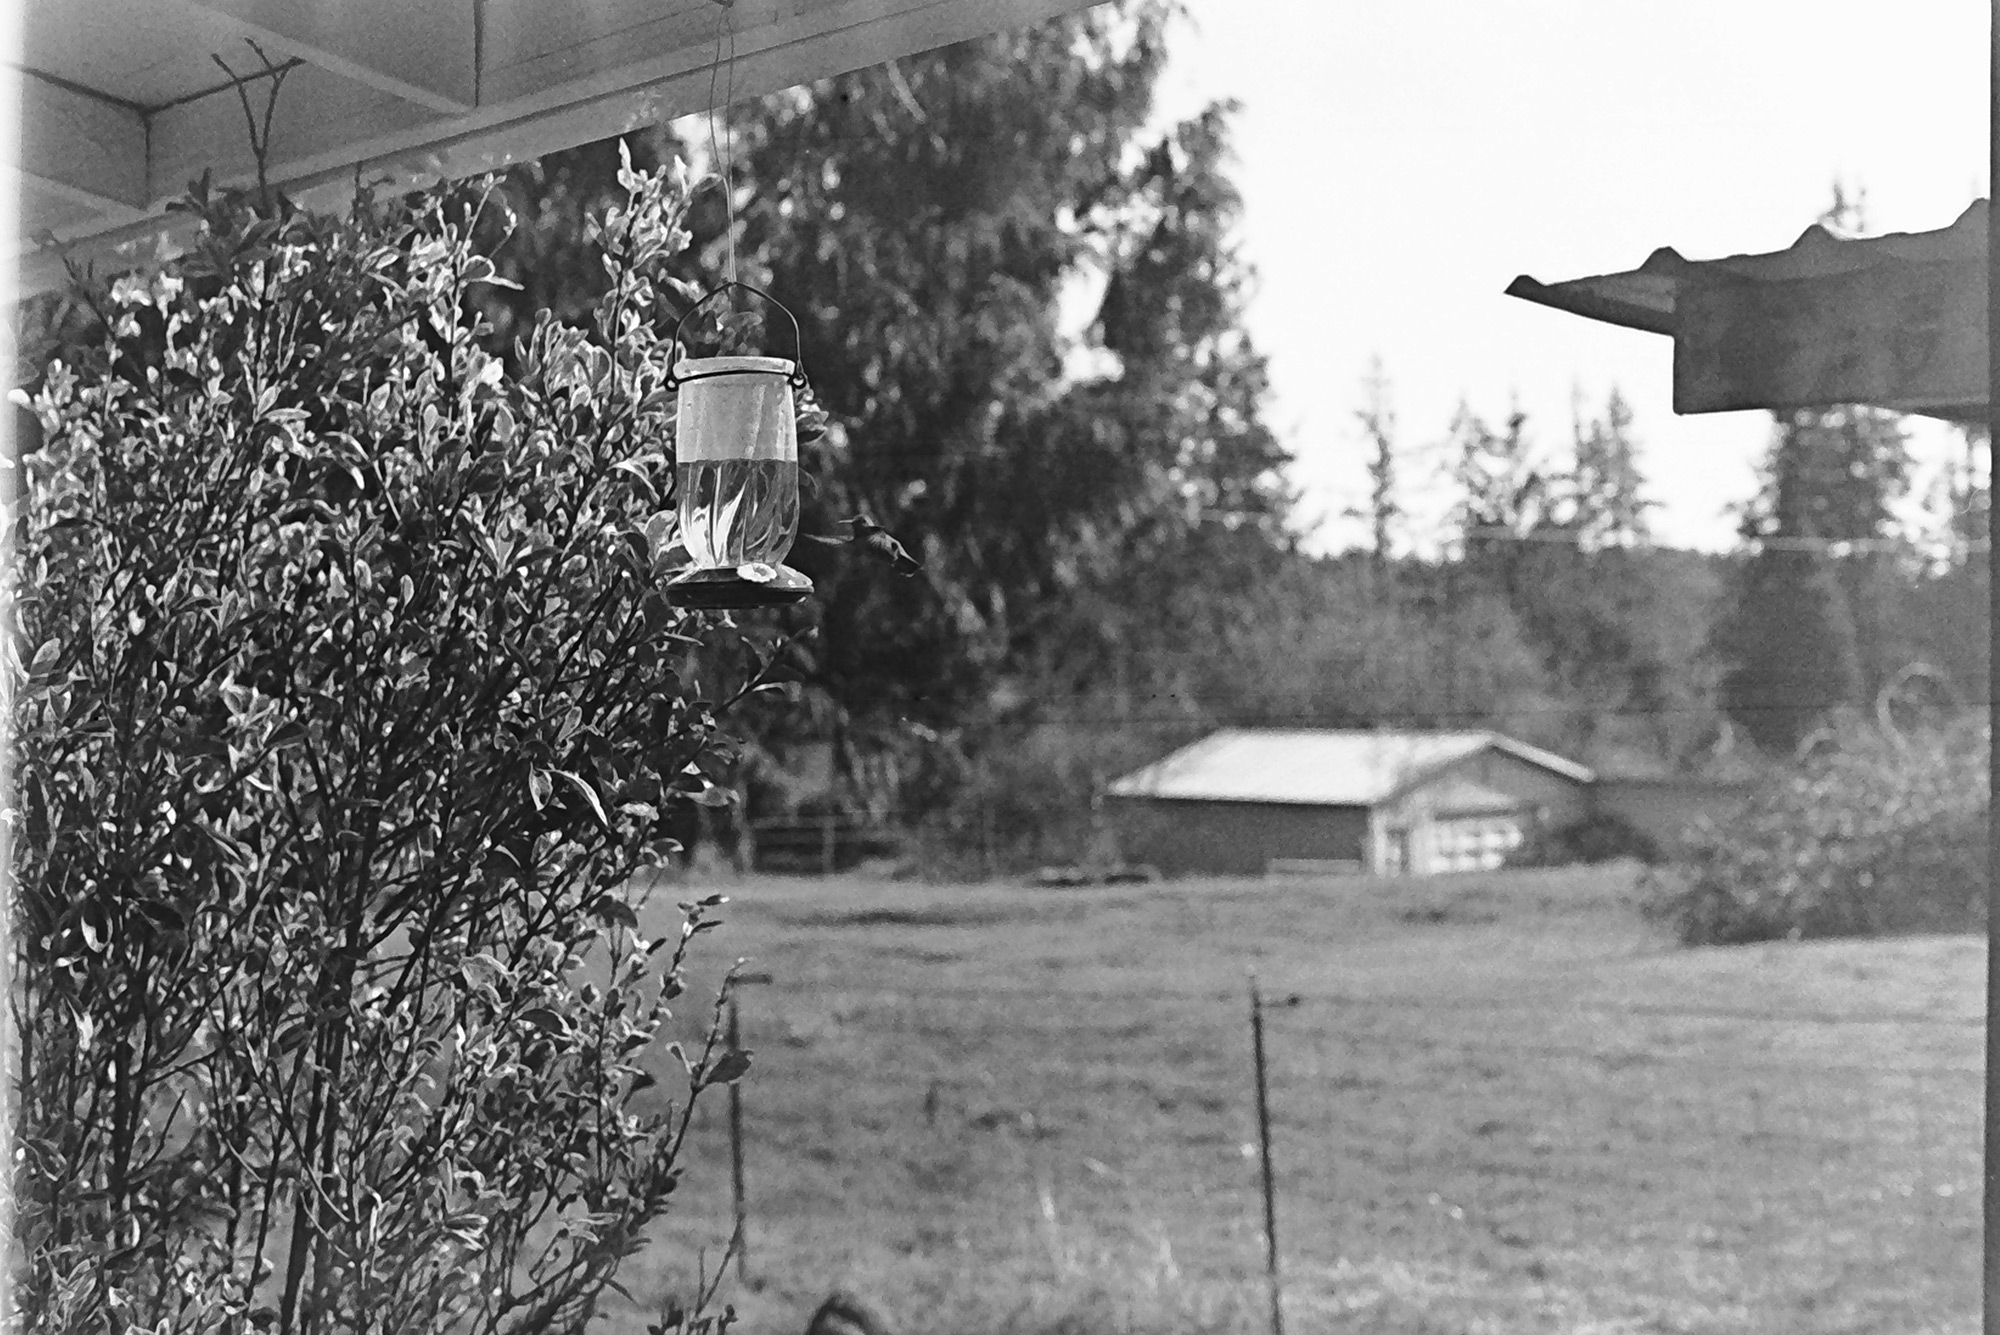 A hummingbird feeder being visited by a hummingbird with a shrub to the left